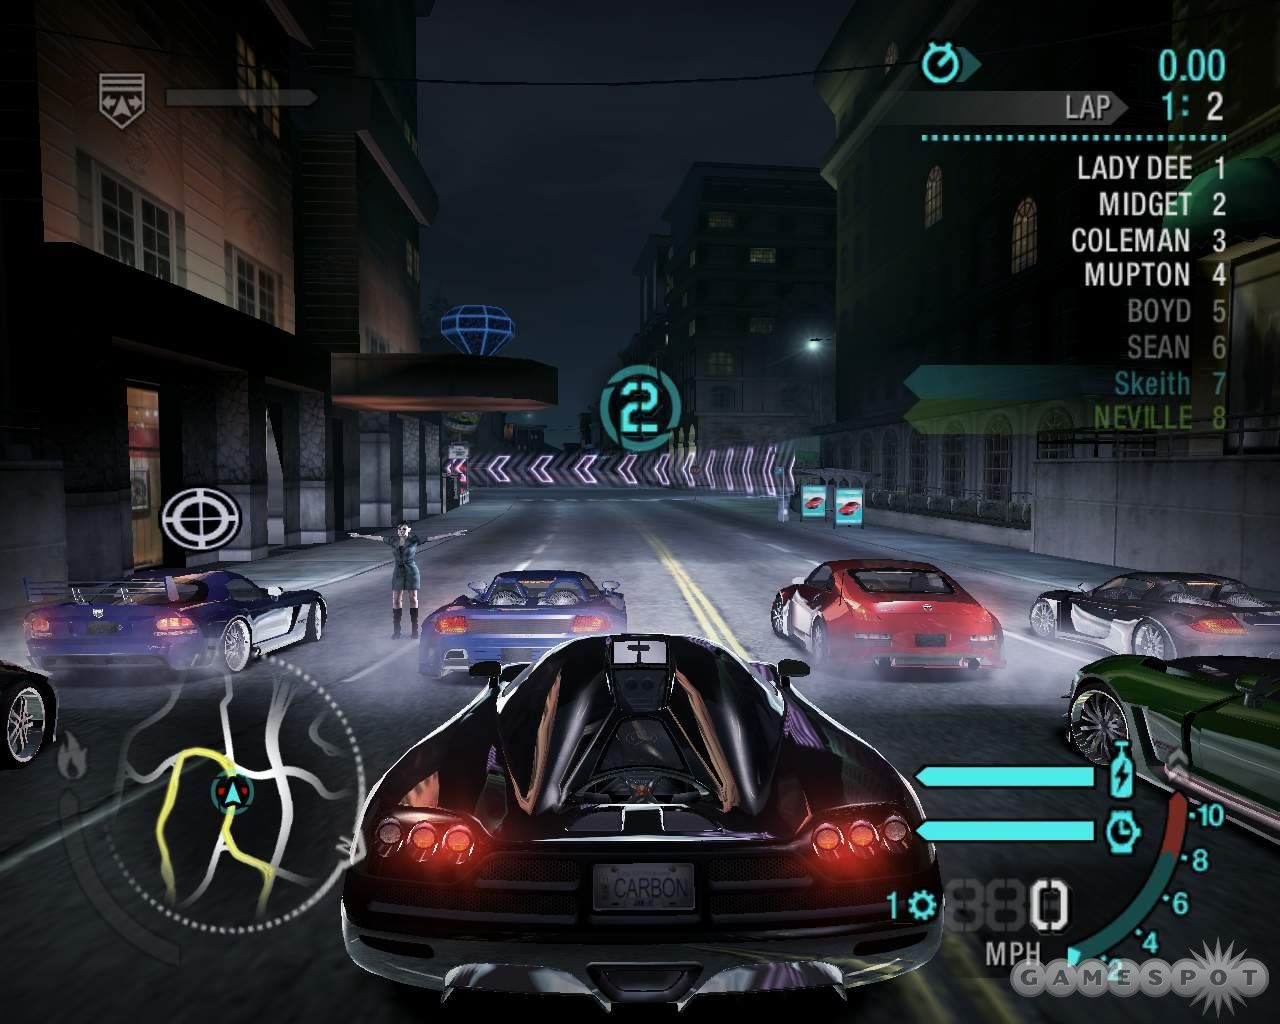 Need For Speed: Carbon (2006) Full Game ISO - Free MediaFire Download Links game screenshot 1